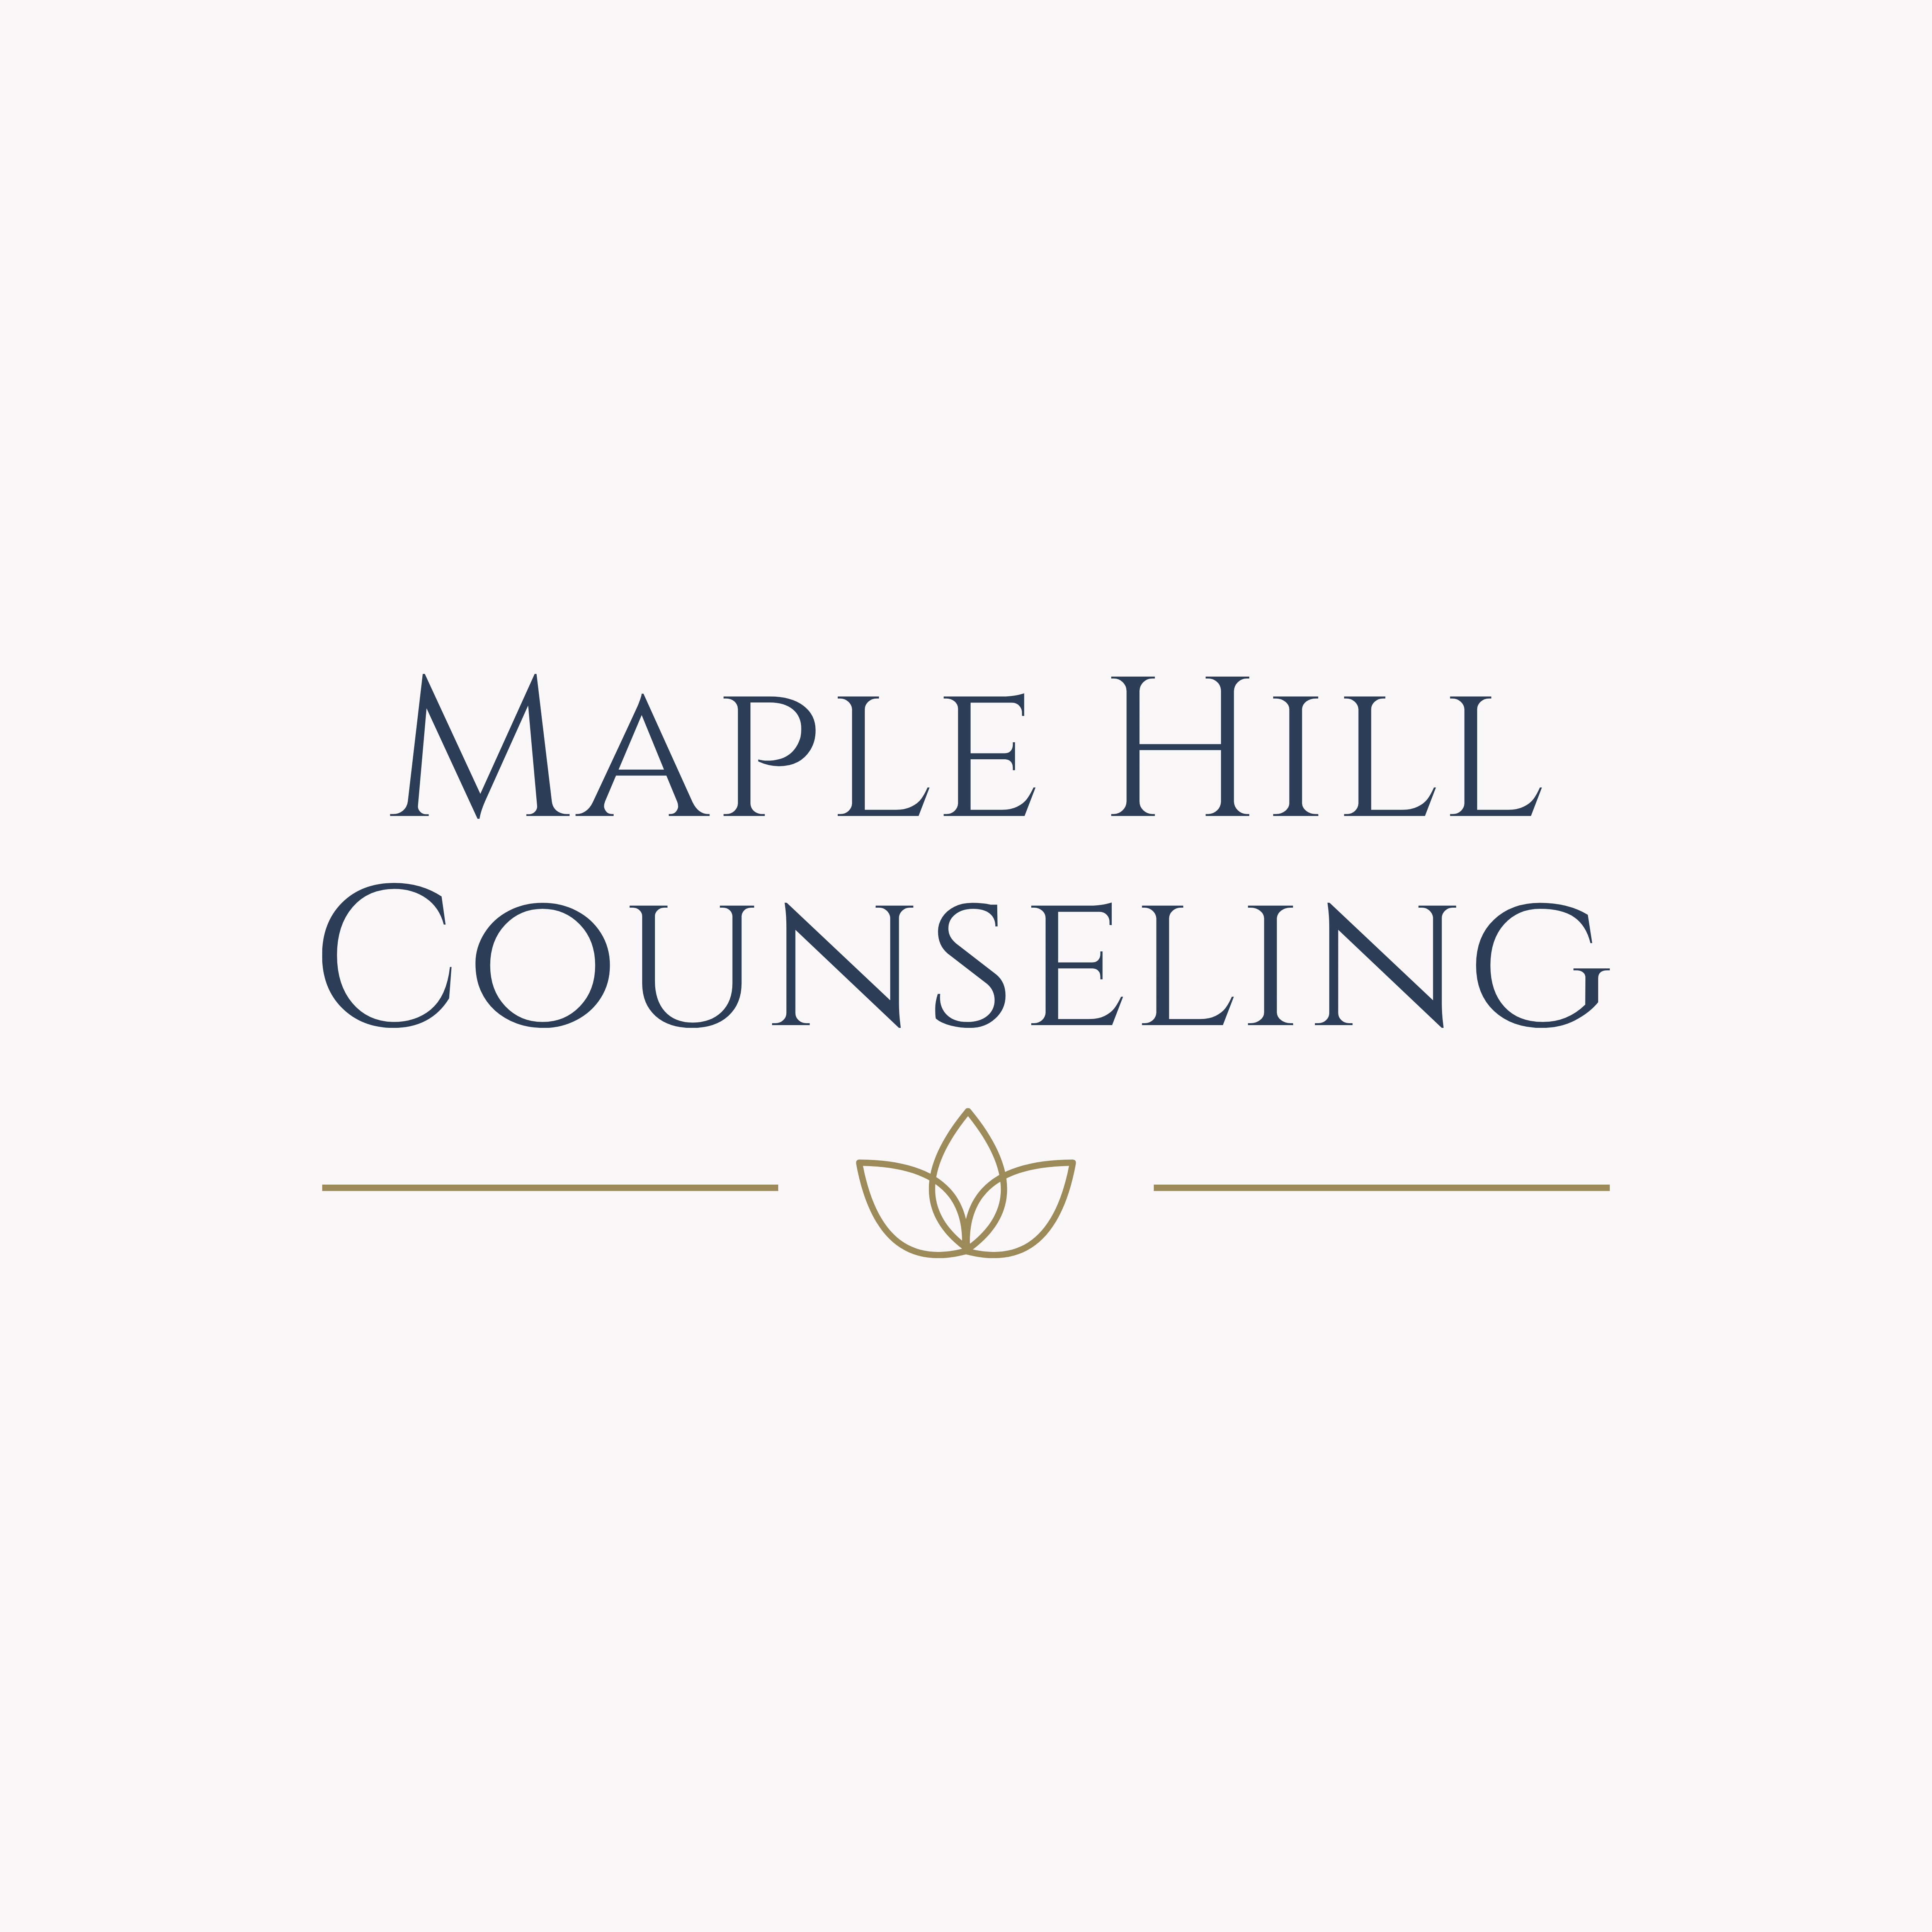 Maple Hill Counseling